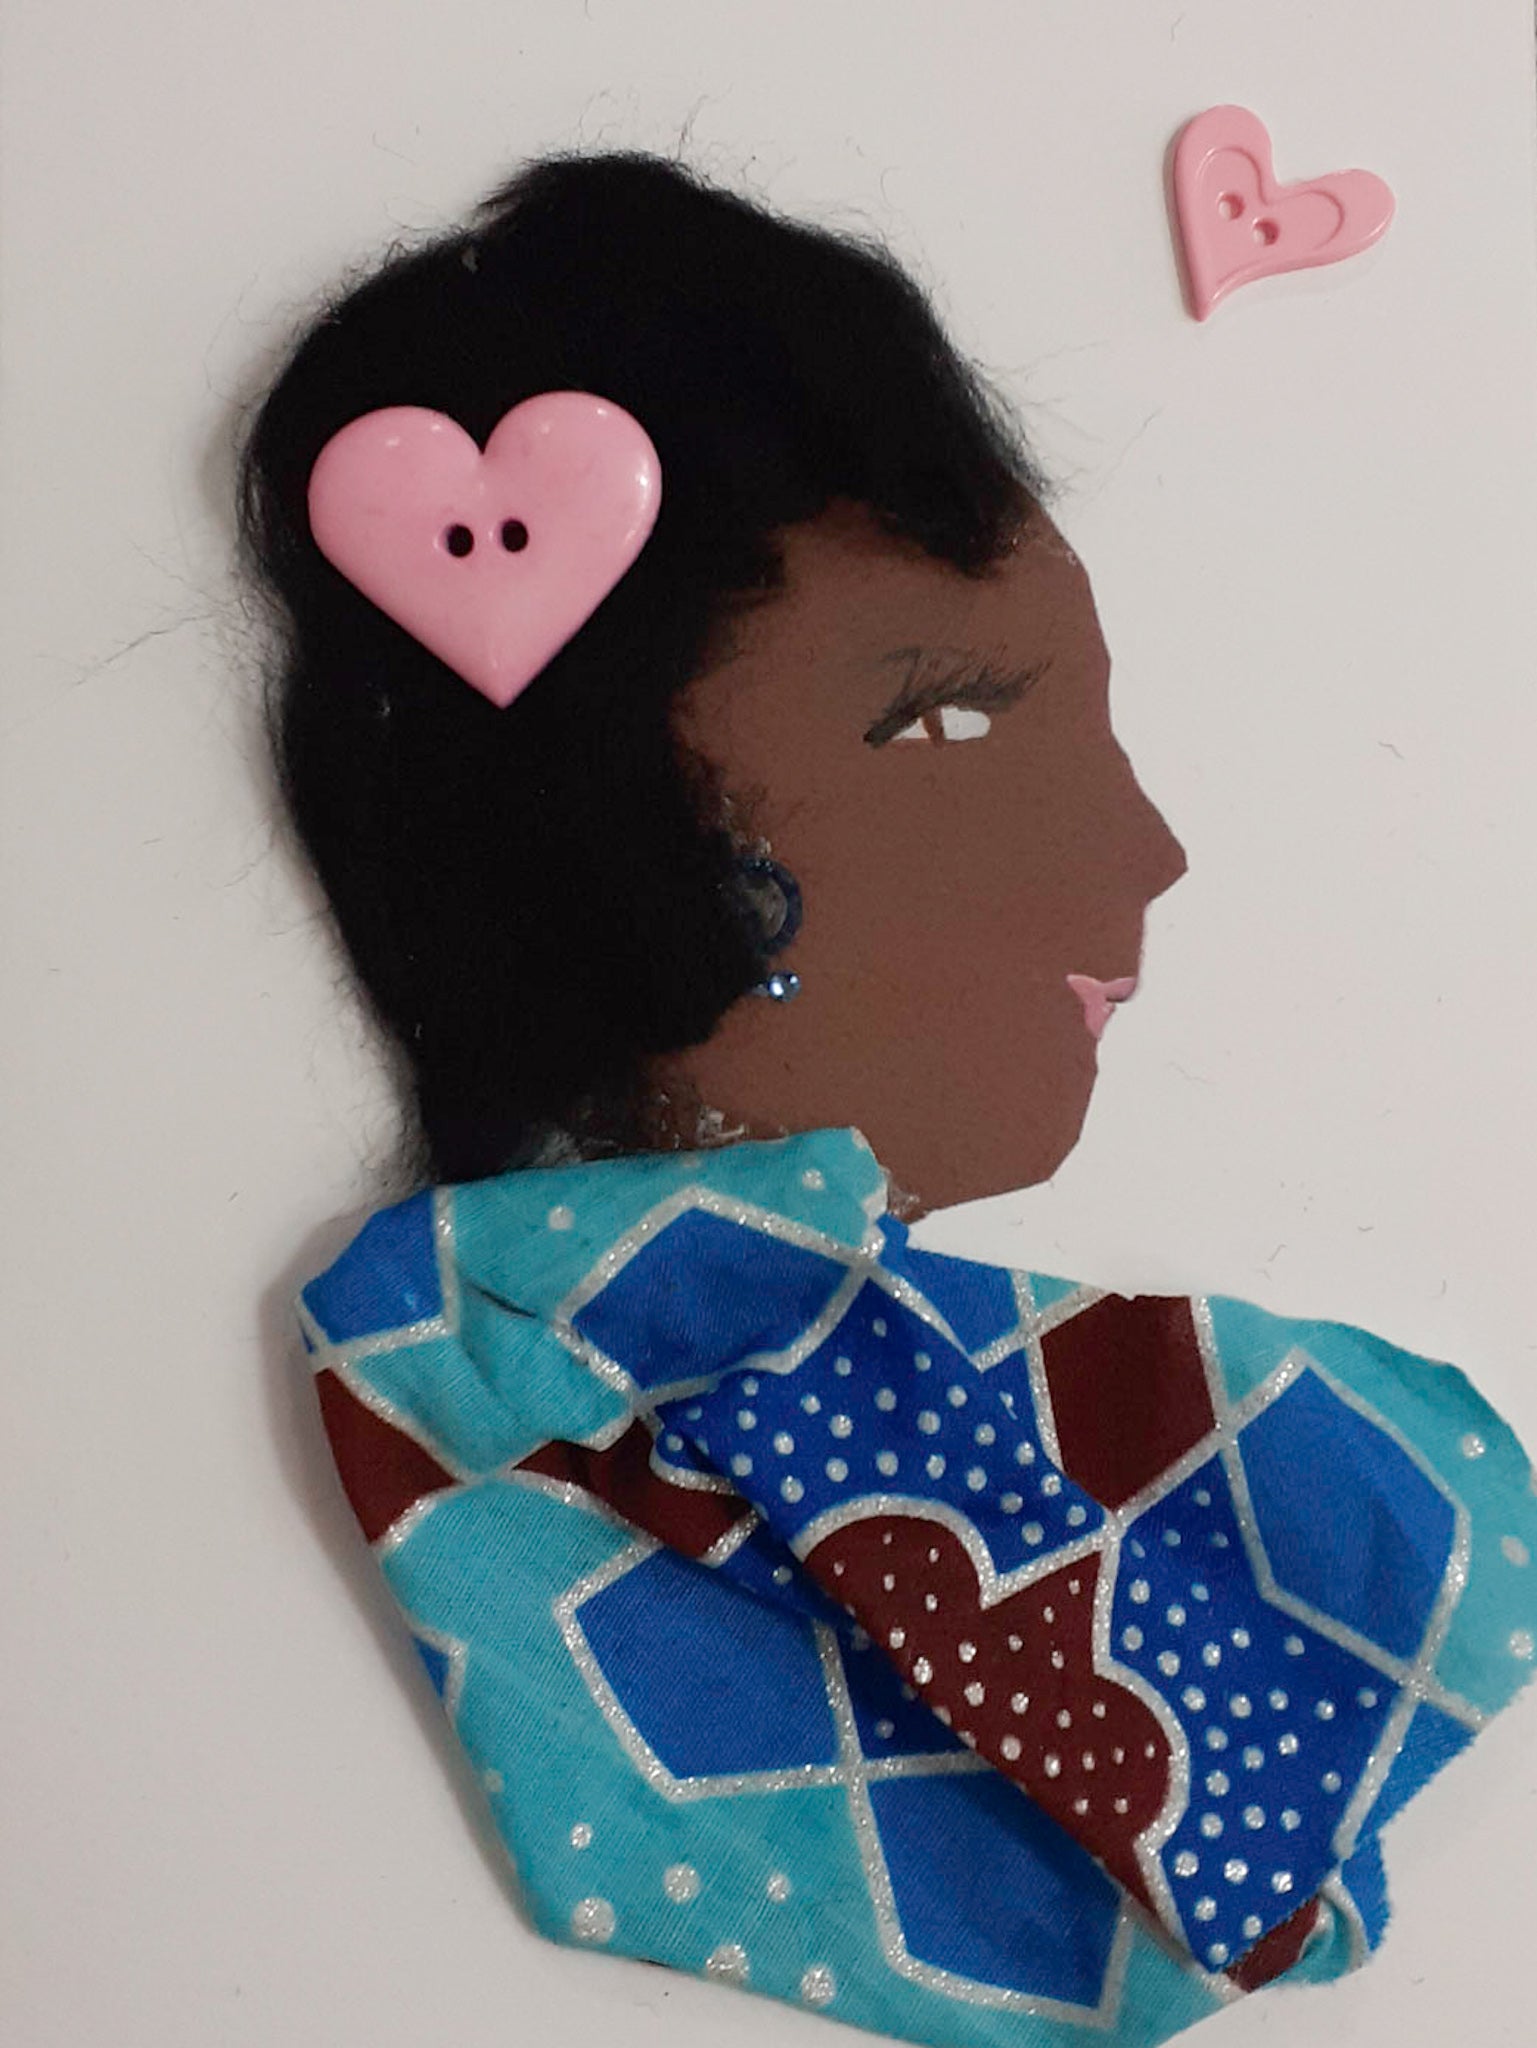 This card is of a woman named Natasha. Natasha wears a light blue, medium blue, and deep red patterned blouse with silver glitter lines throughout. In her short black hair, there is a light pink heart-shaped button. On the top right corner, there is a small pink heart. 